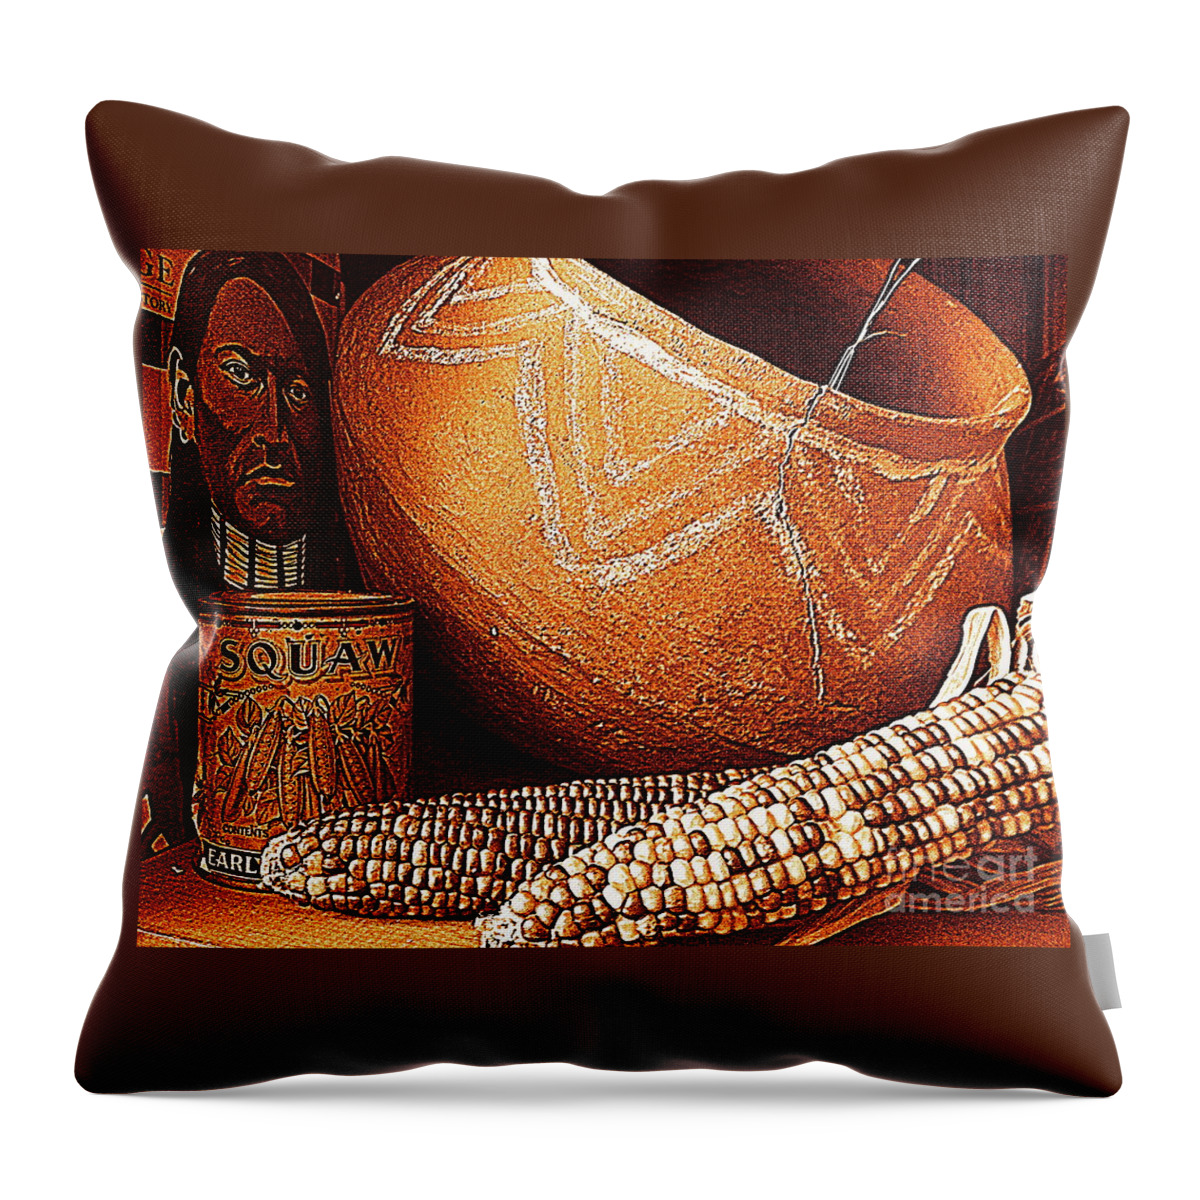 Nola Throw Pillow featuring the photograph New Orleans Maize The Indian Corn Still Life In Louisiana by Michael Hoard